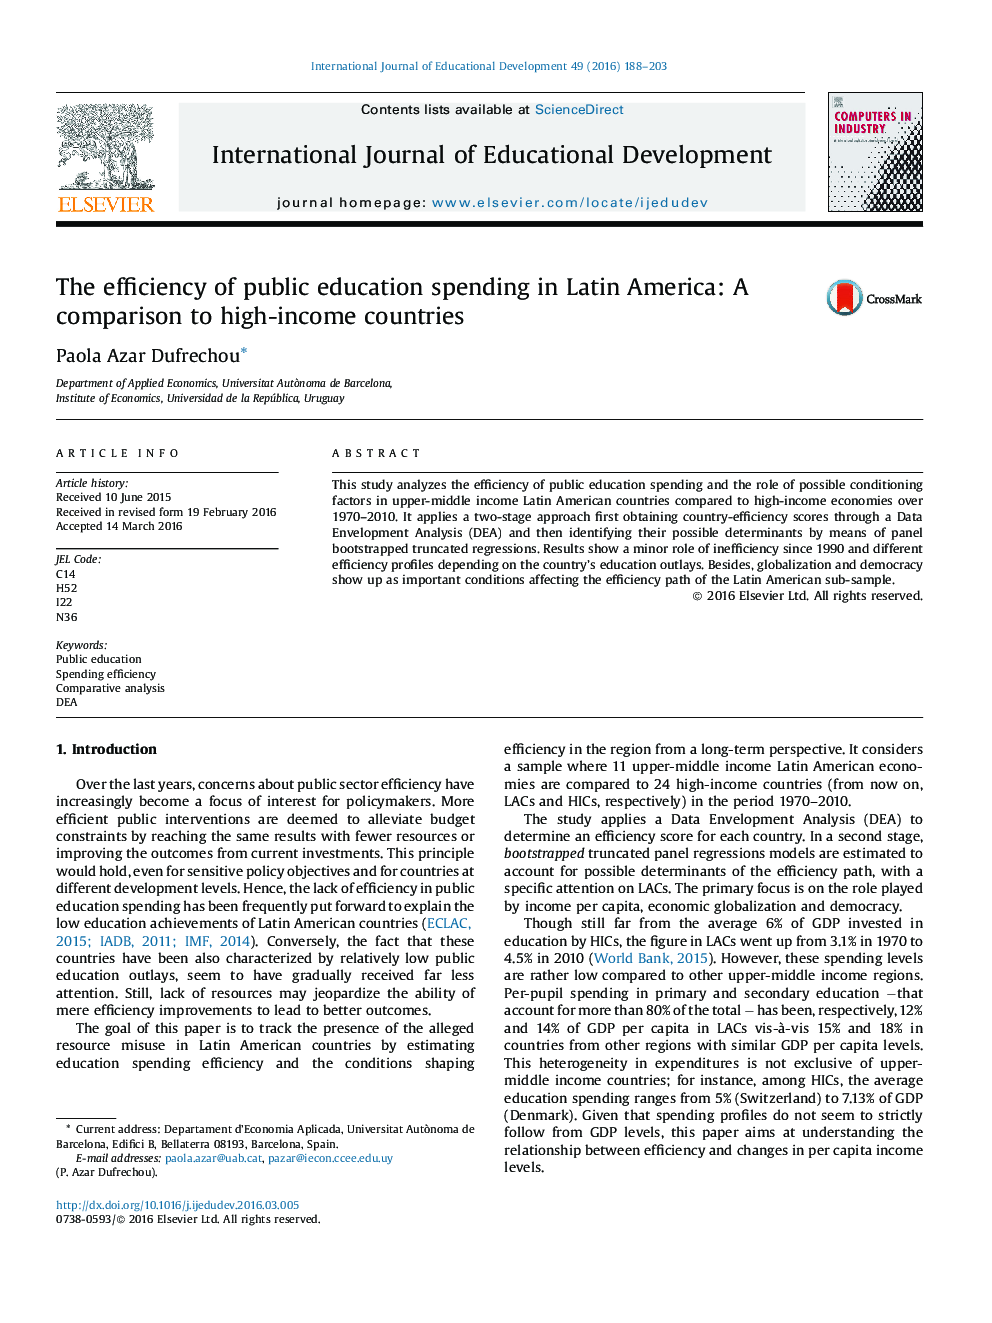 The efficiency of public education spending in Latin America: A comparison to high-income countries